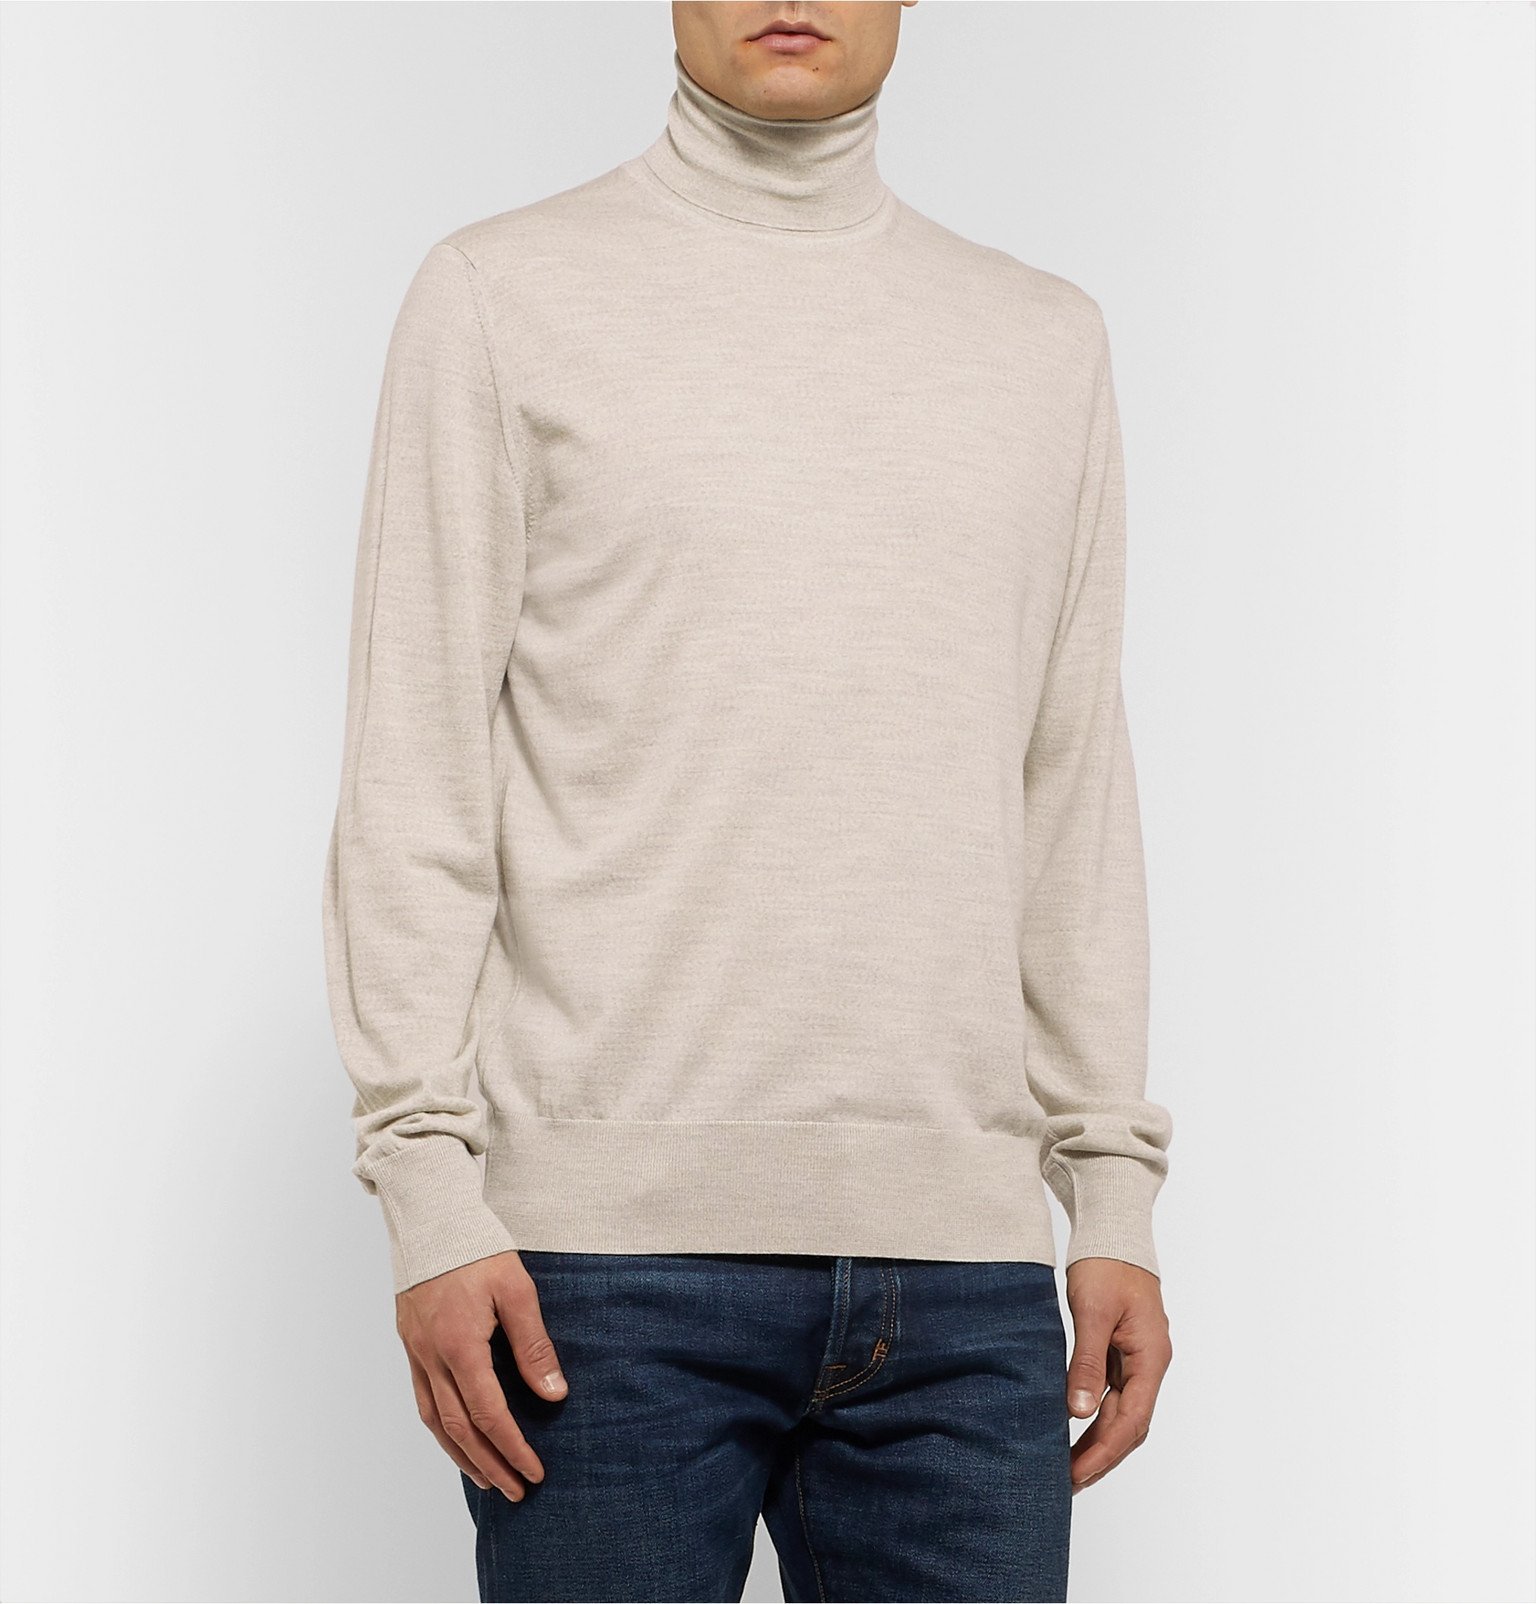 Connolly - Goodwood Merino Wool Rollneck Sweater - Neutrals Connolly